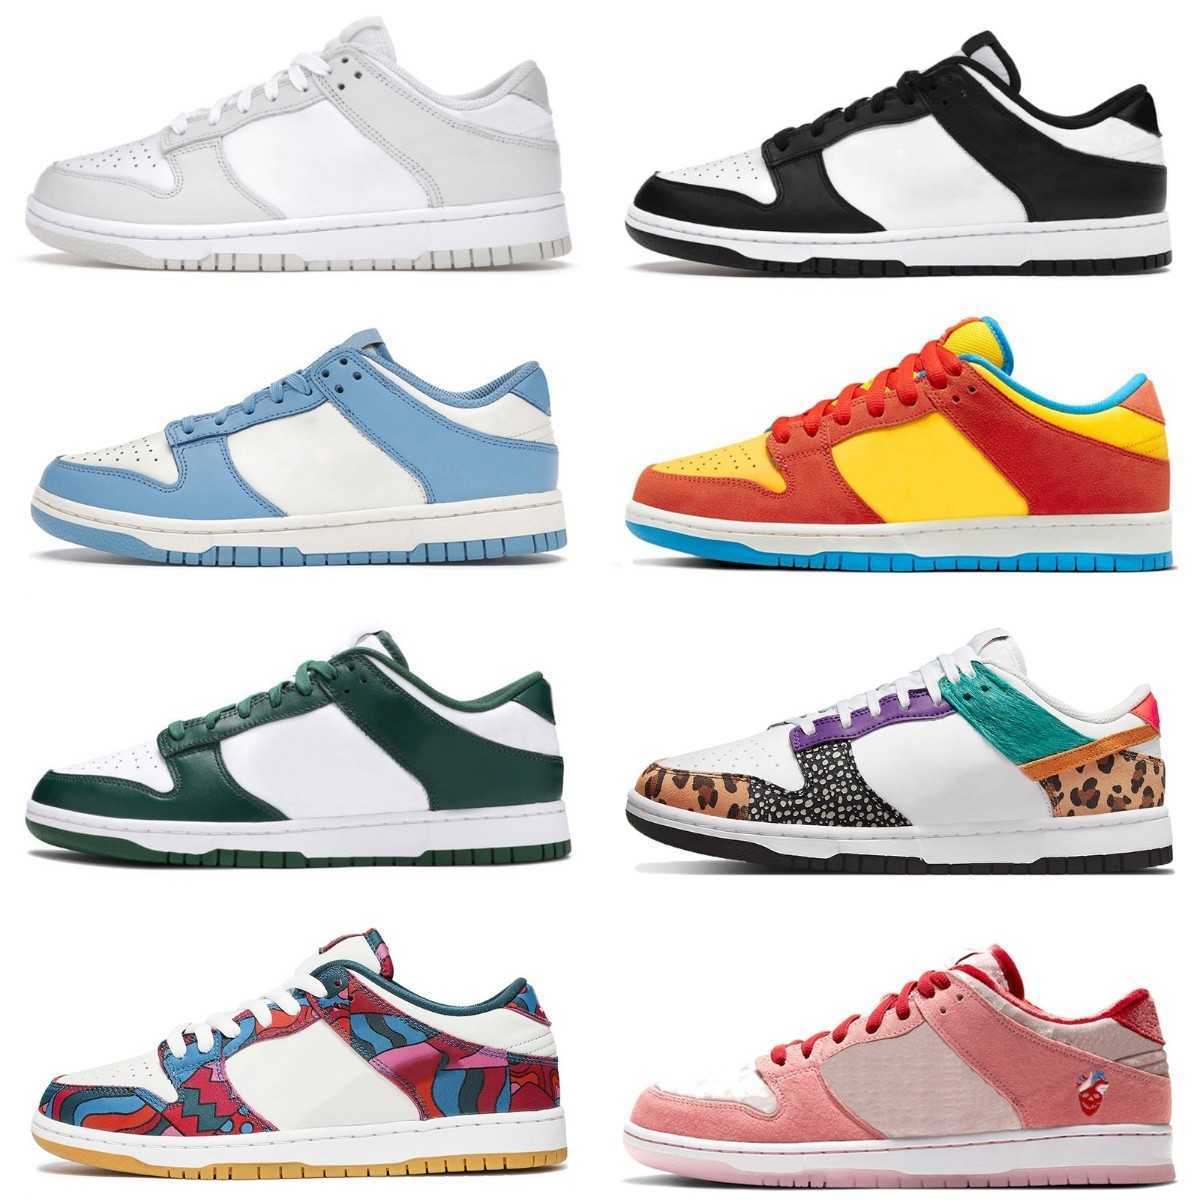 

2023 Trainer SB Lows Running Shoes DuNkS Safari Mix Paisley UNC Black White Women Men World Champ Sports Bart Simpson Green Chunky Dunky Grey Fog Designers Sneakers, Please contact us